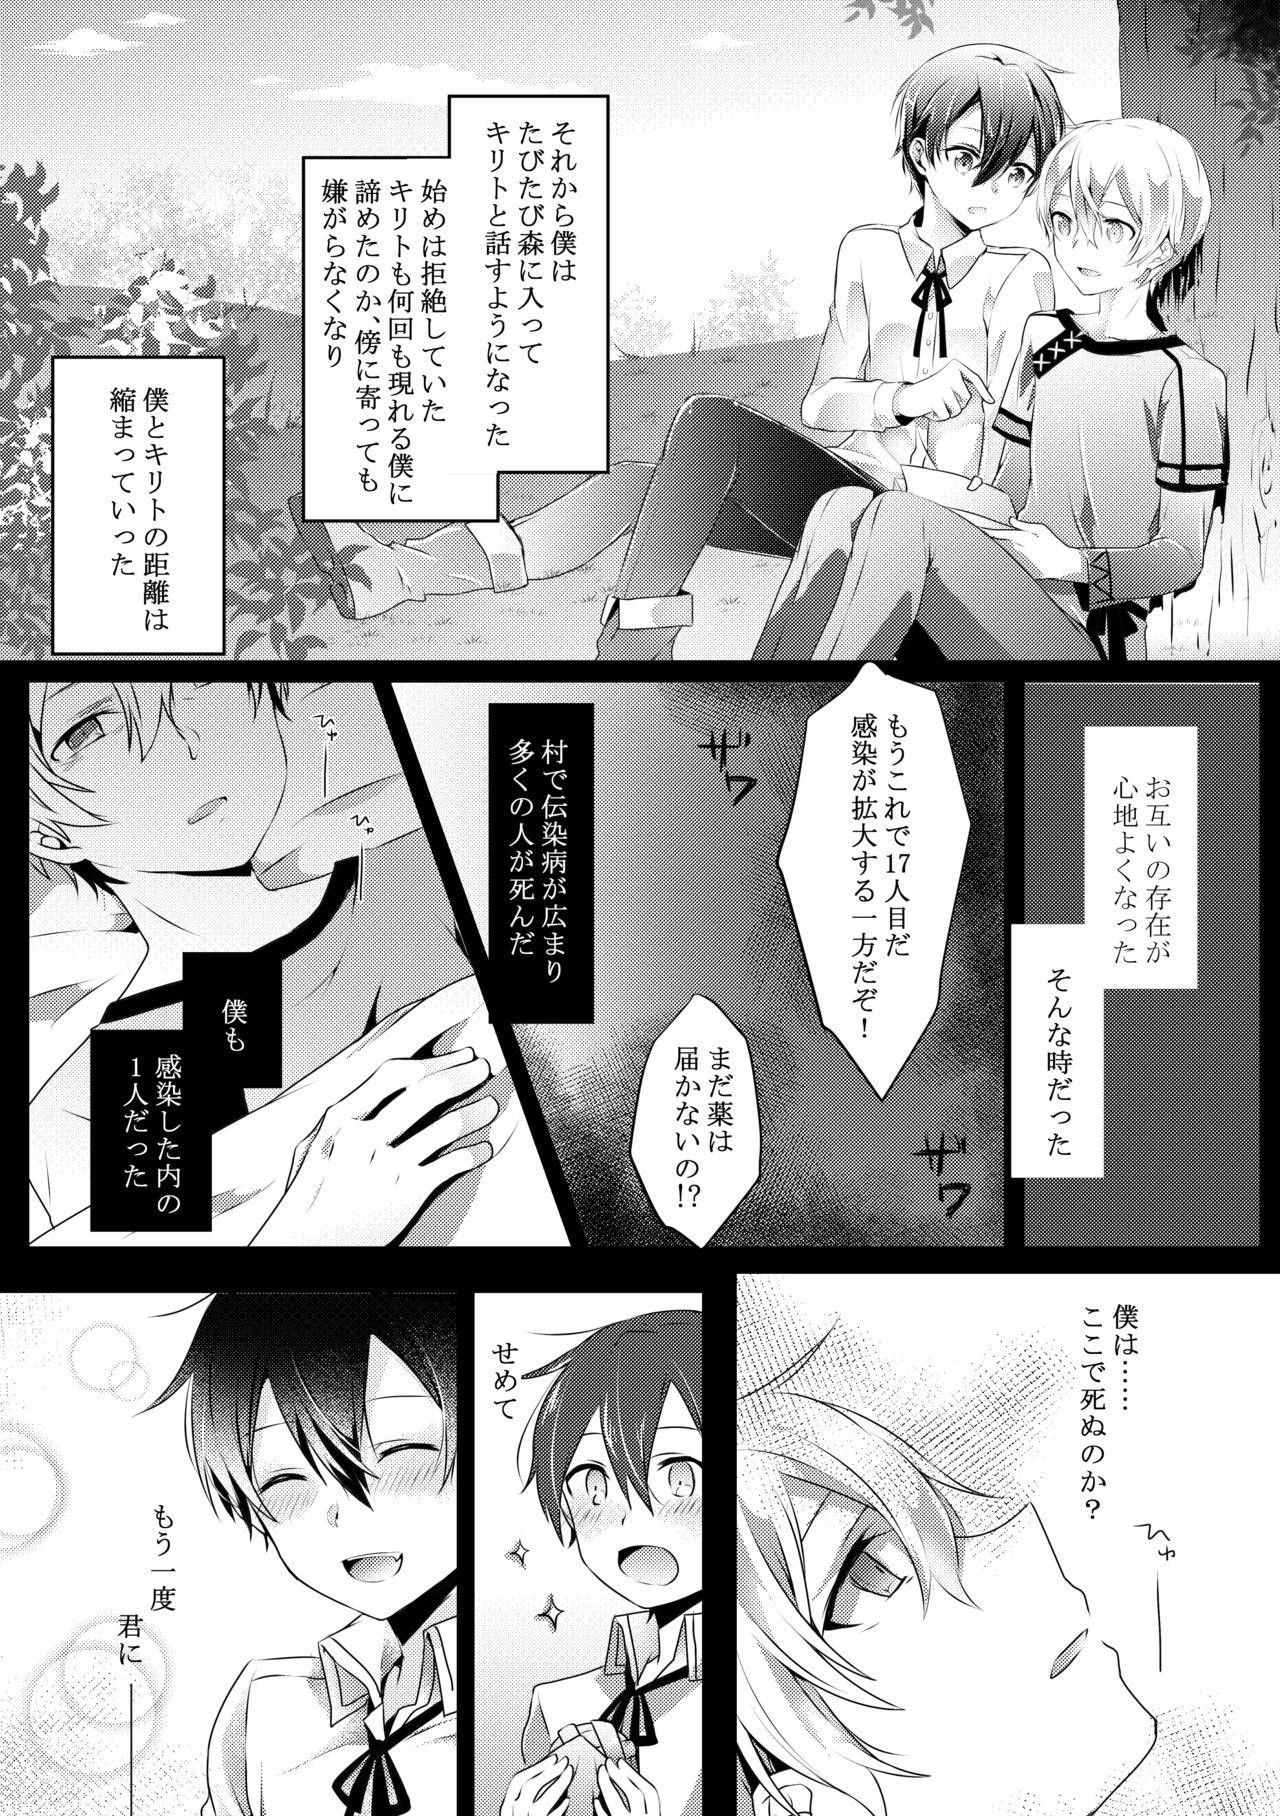 Gay Shorthair 君と僕のワルツ - Sword art online Workout - Page 12